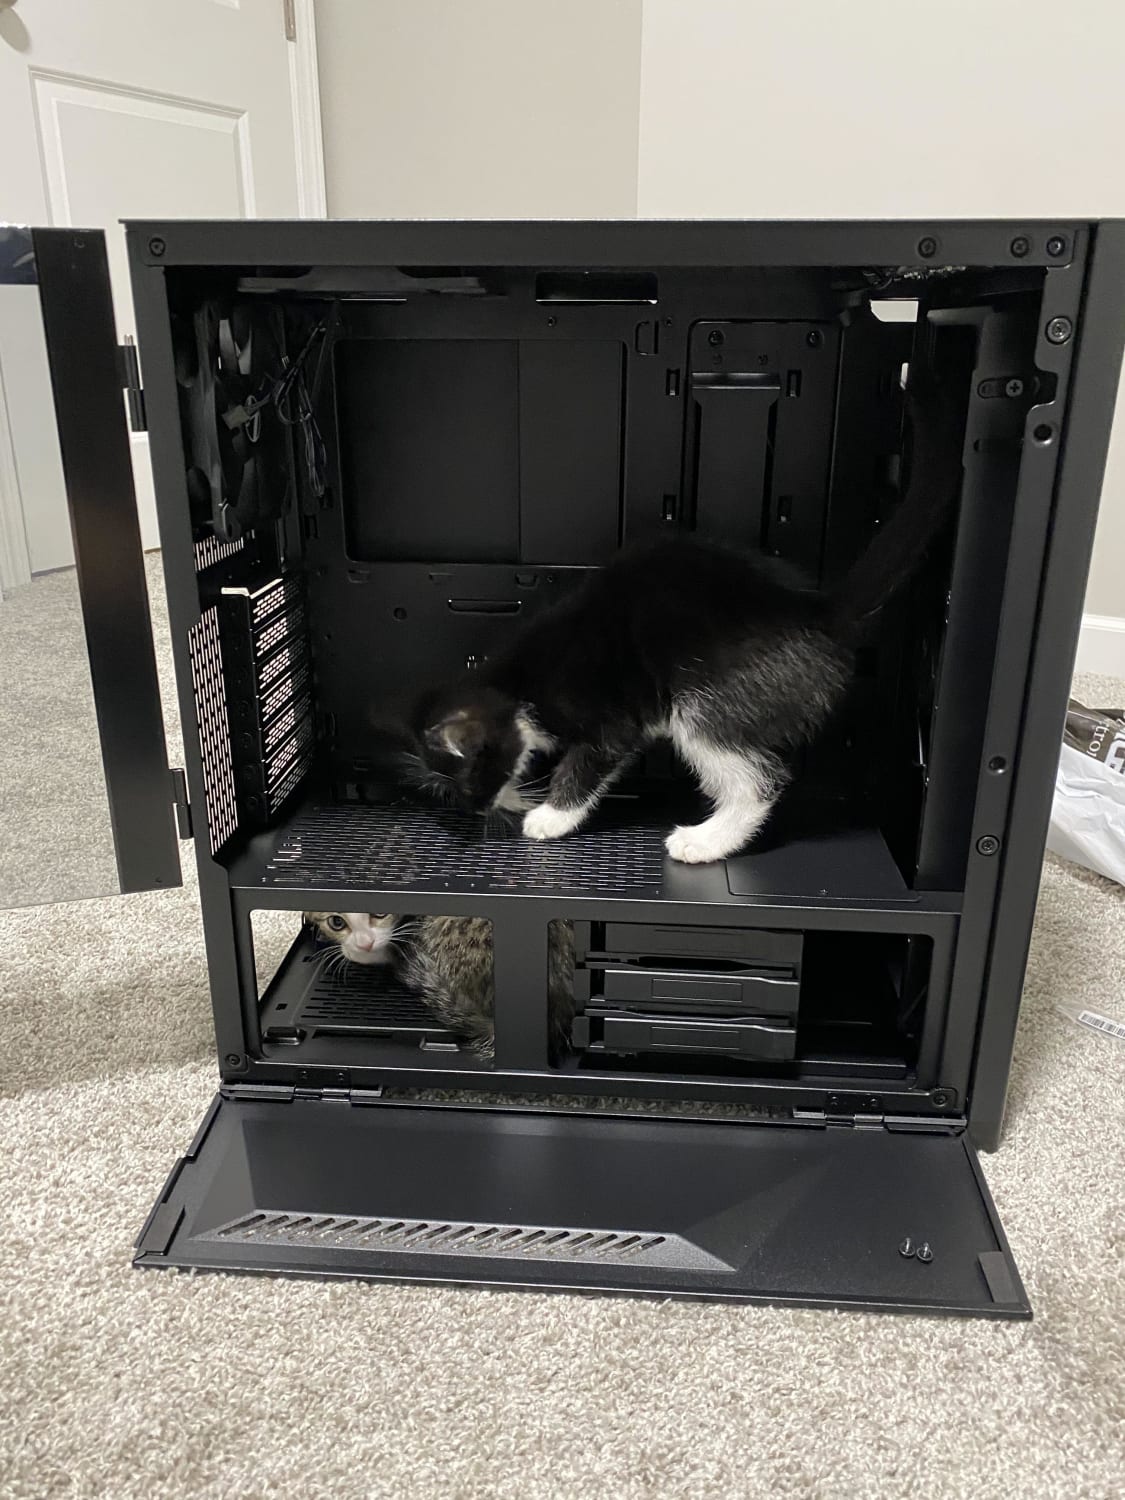 My computer had some bugs, kitten squad came to the rescue!